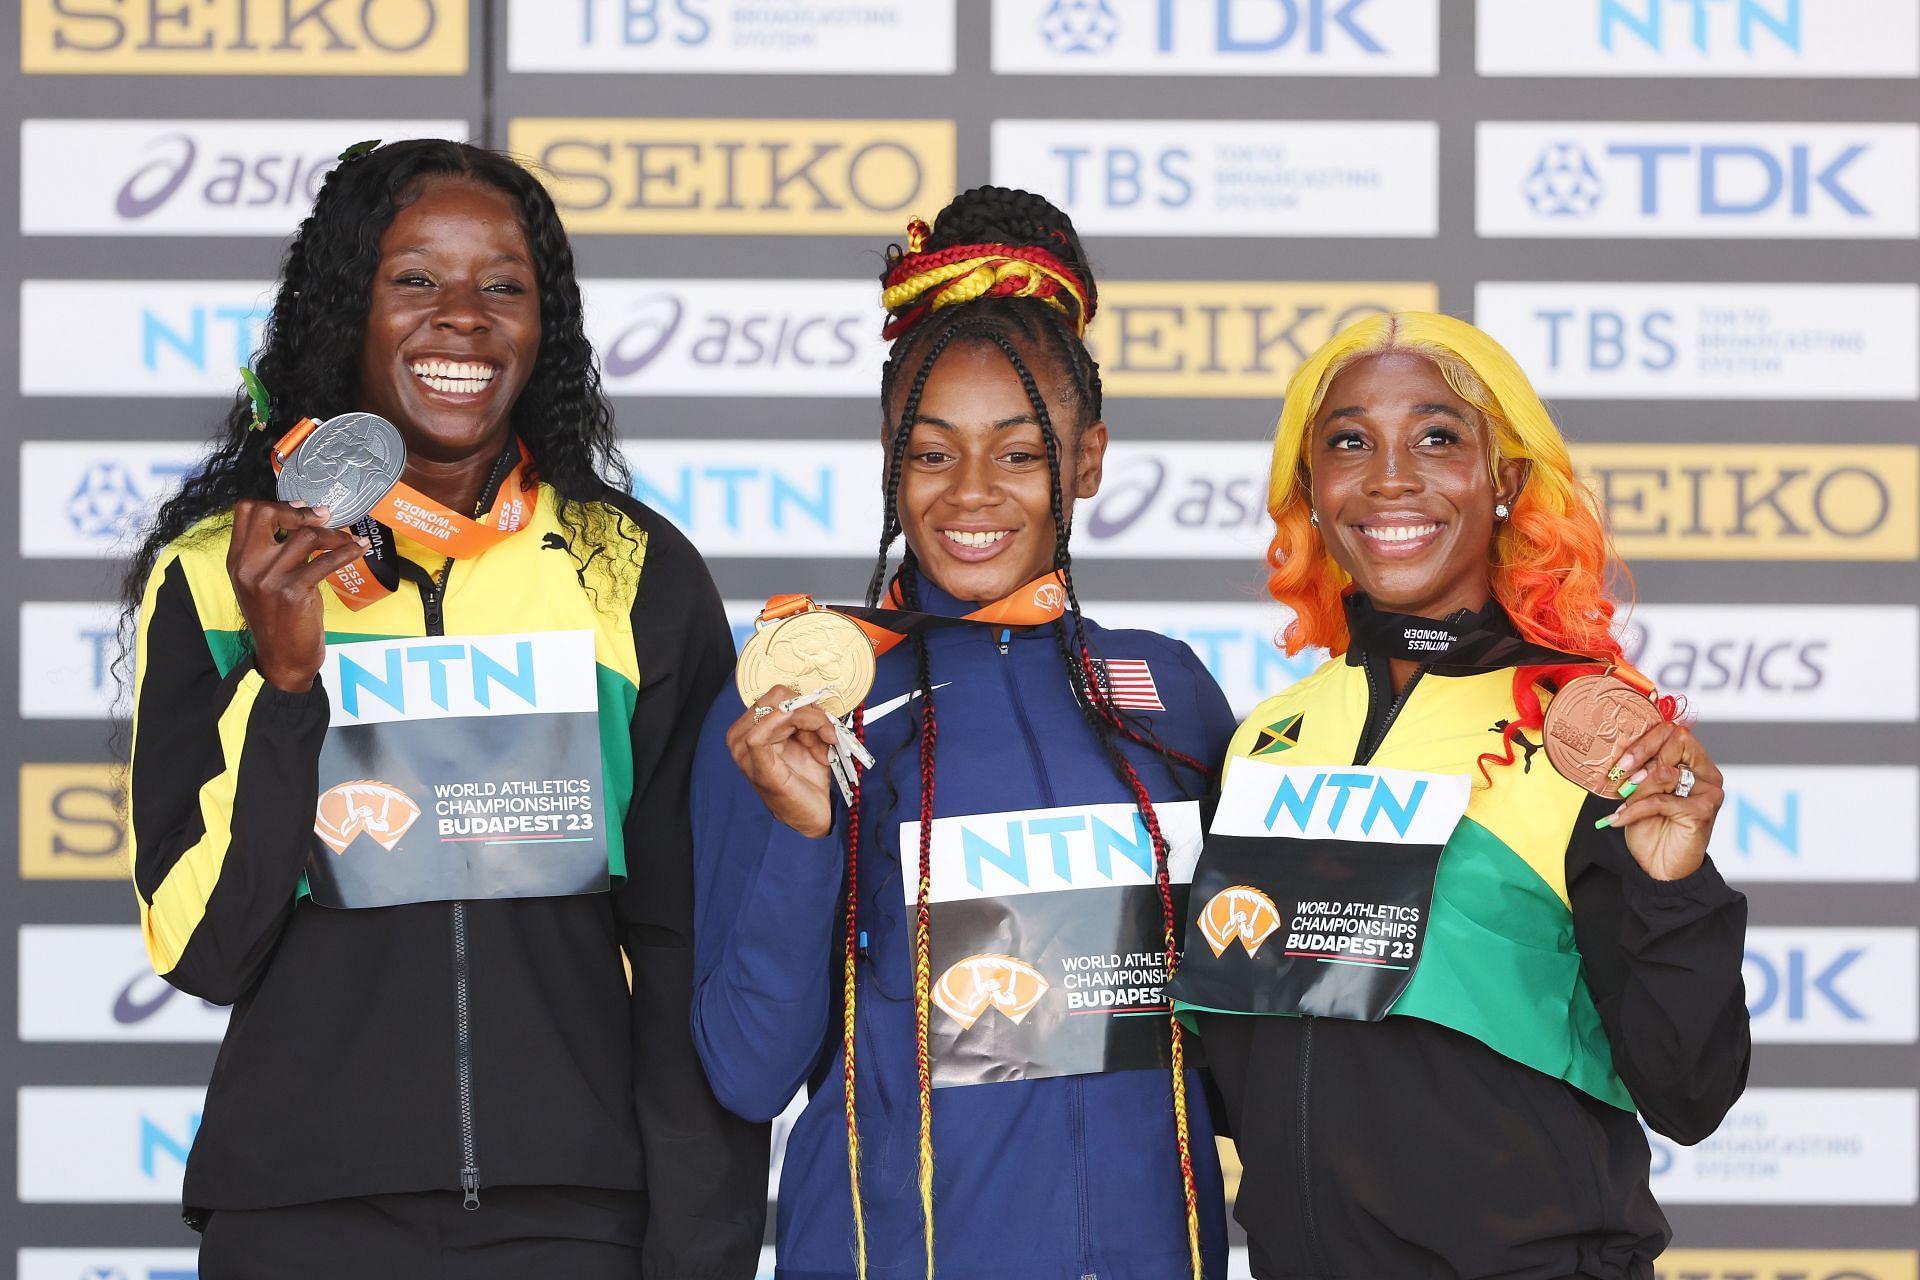 Silver medalist Shericka Jackson, Gold medalist Sha&#039;Carri Richardson, and Bronze medalist Shelly-Ann Fraser-Pryce pose for a photo during the medal ceremony for the Women&#039;s 100m during the World Athletics Championships 2023 in Budapest, Hungary.